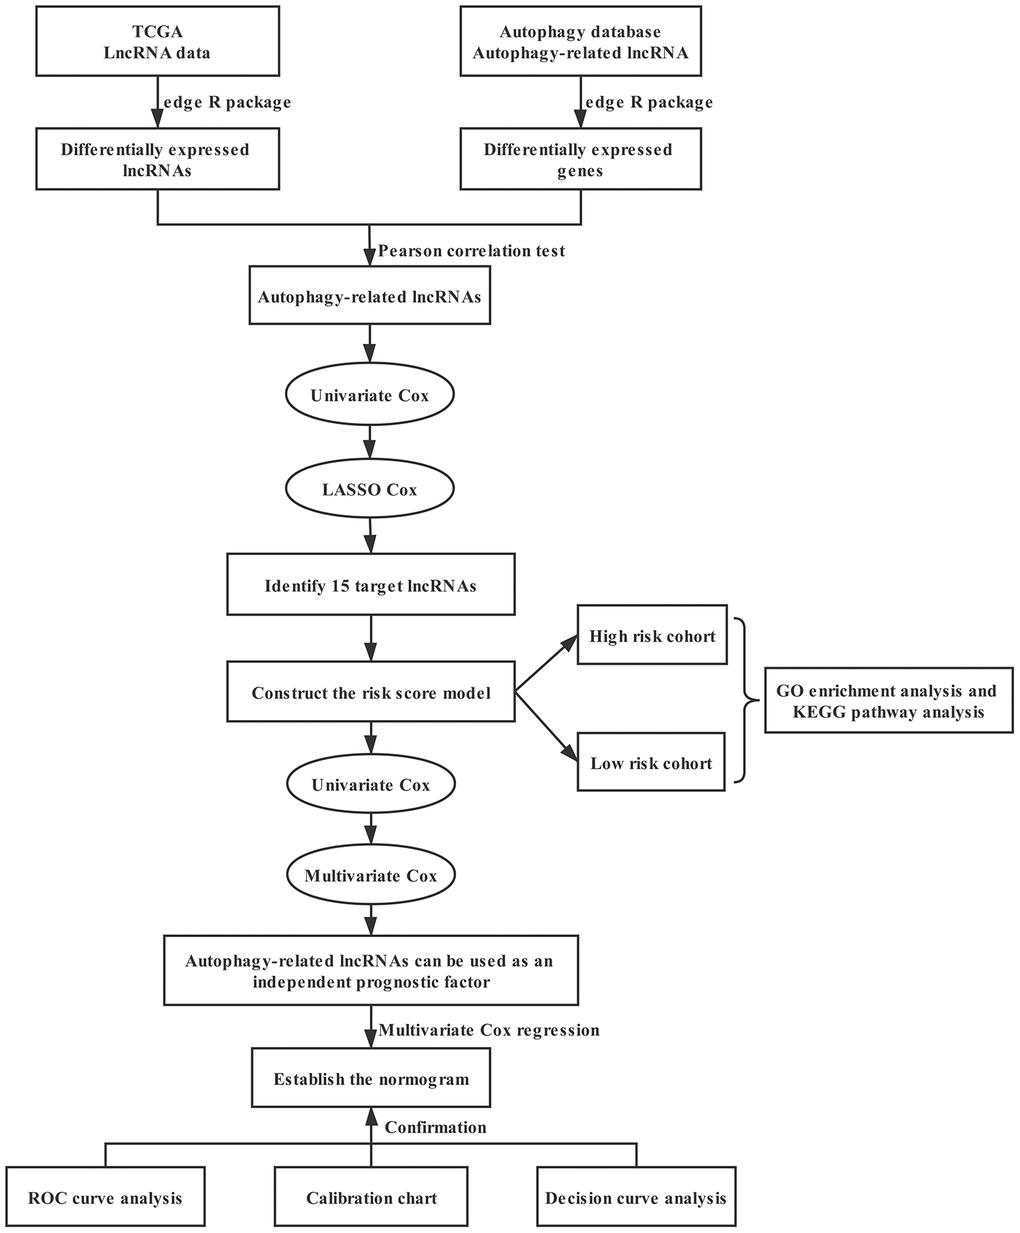 Flowchart showing the creation and evaluation of the prognostic model.